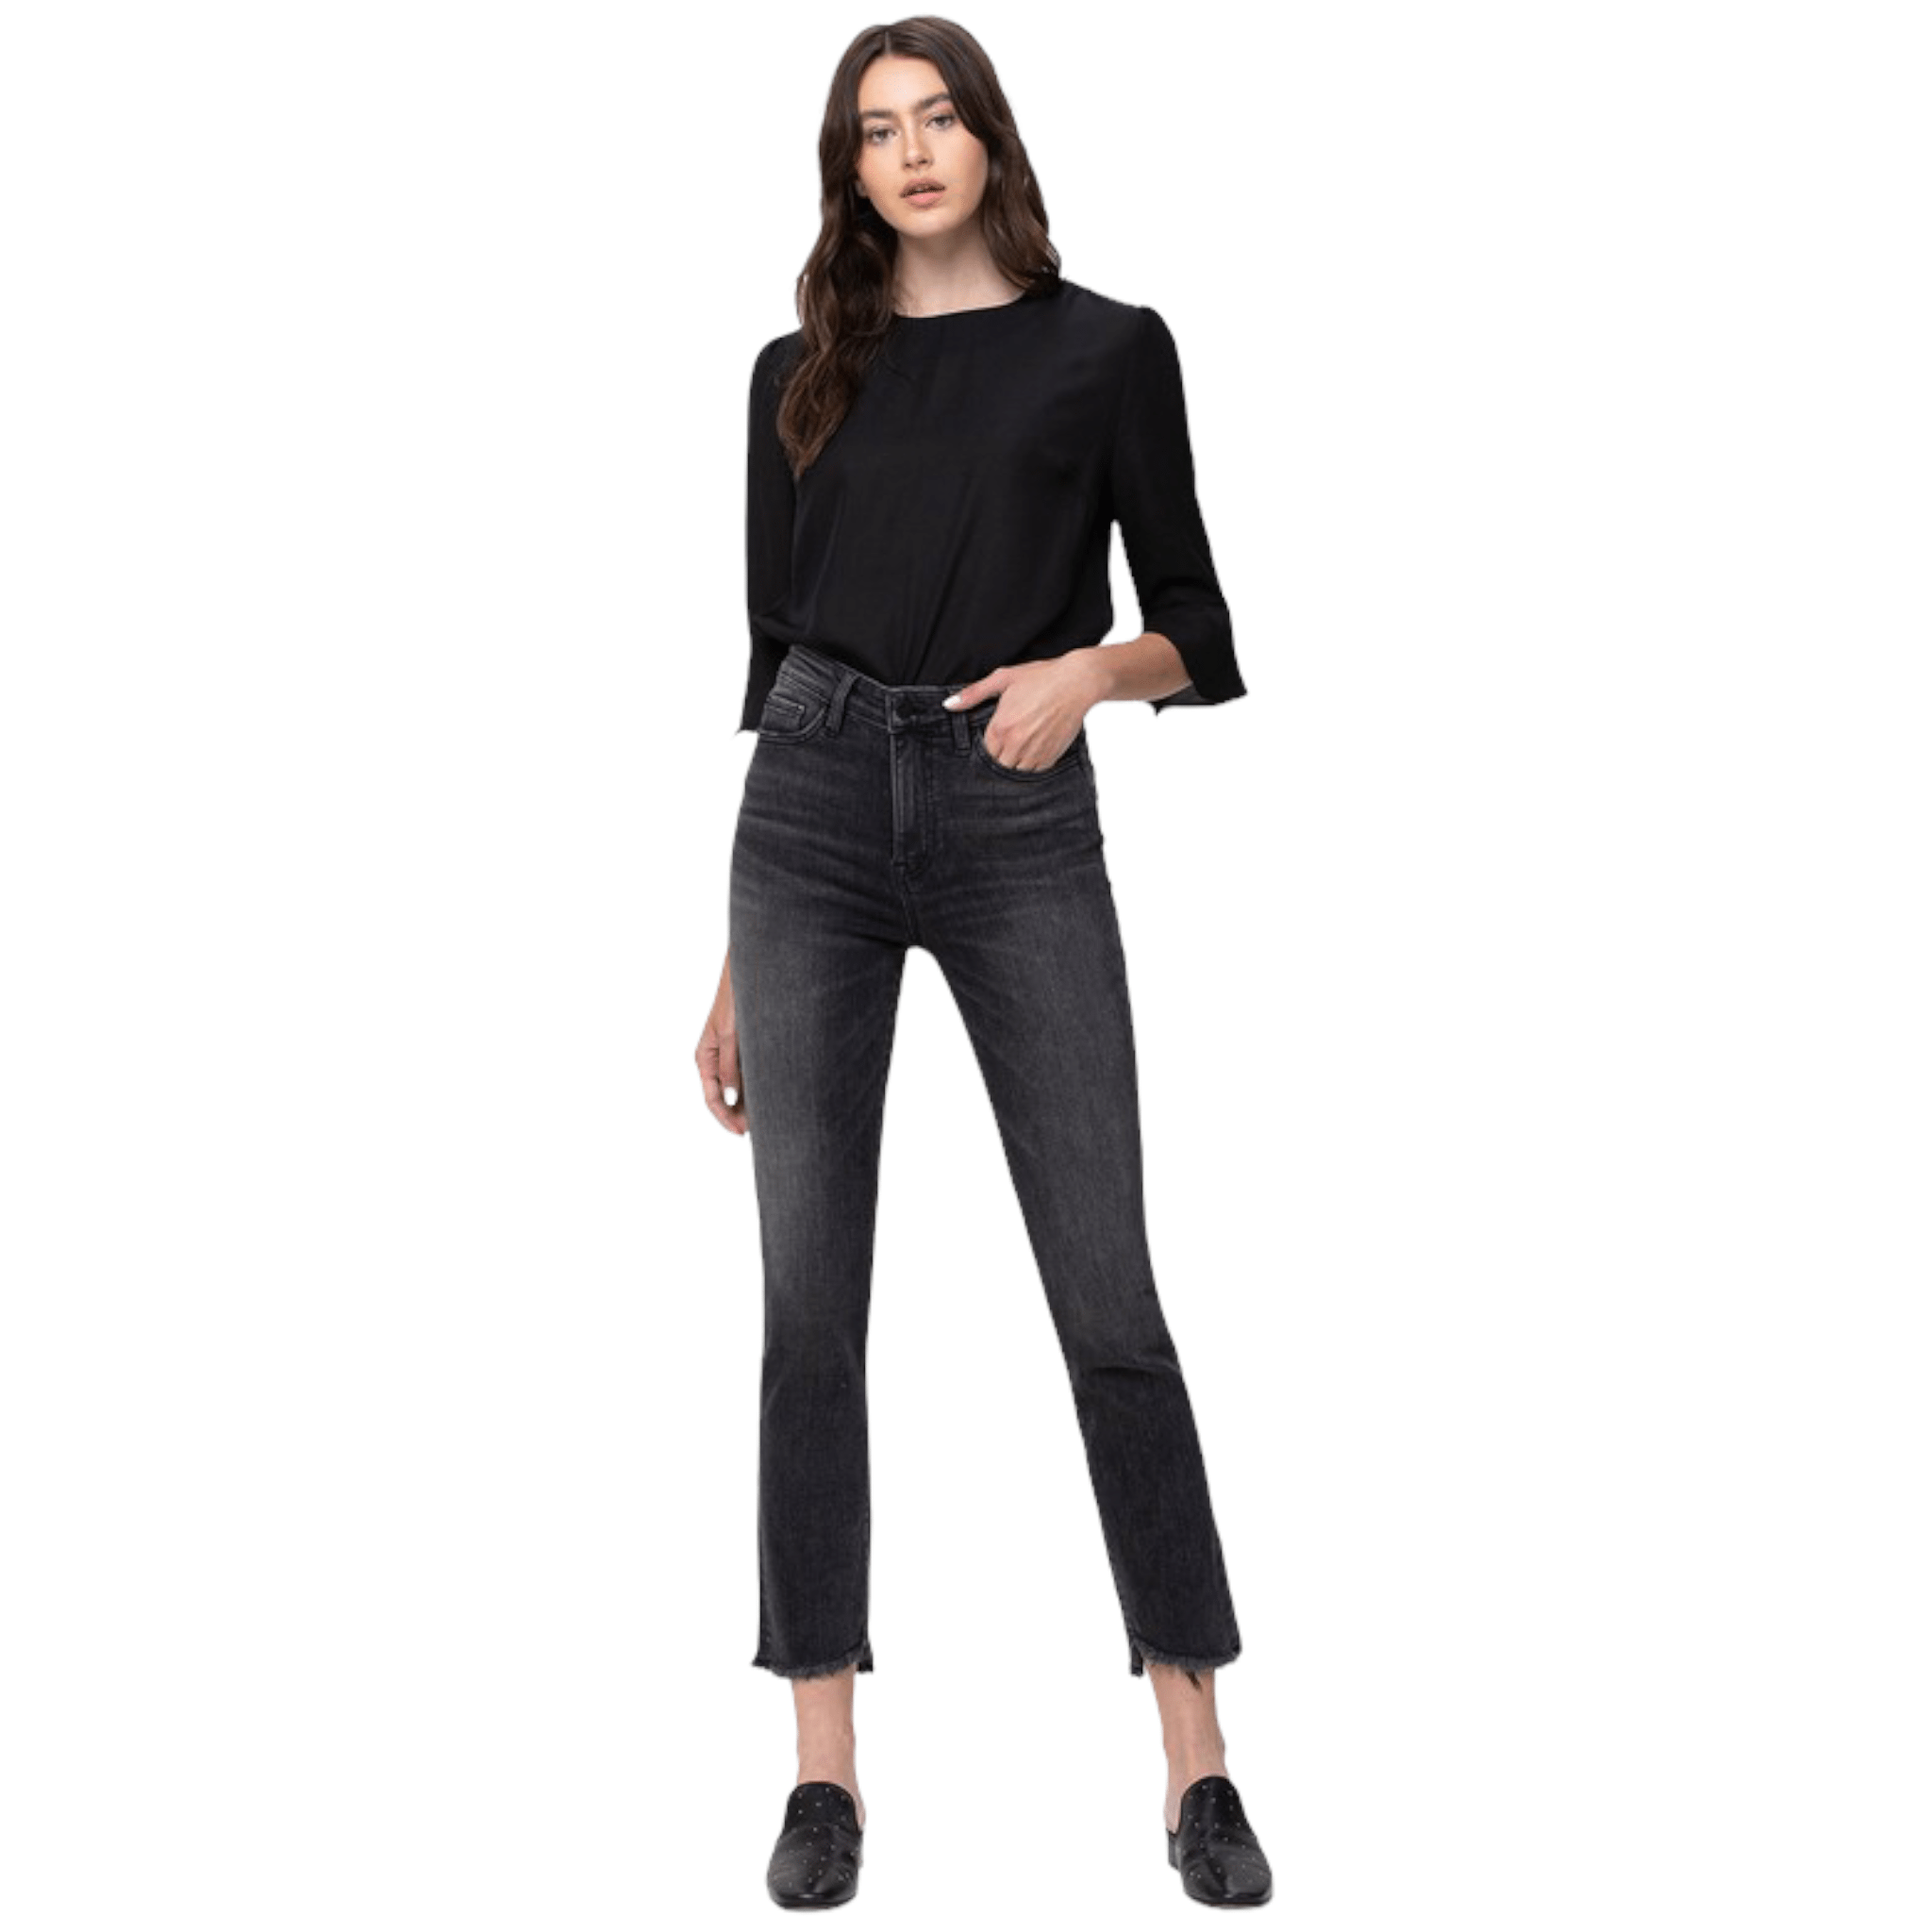 High Rise straight crop with uneven hem detail black jeans by Flying Monkey